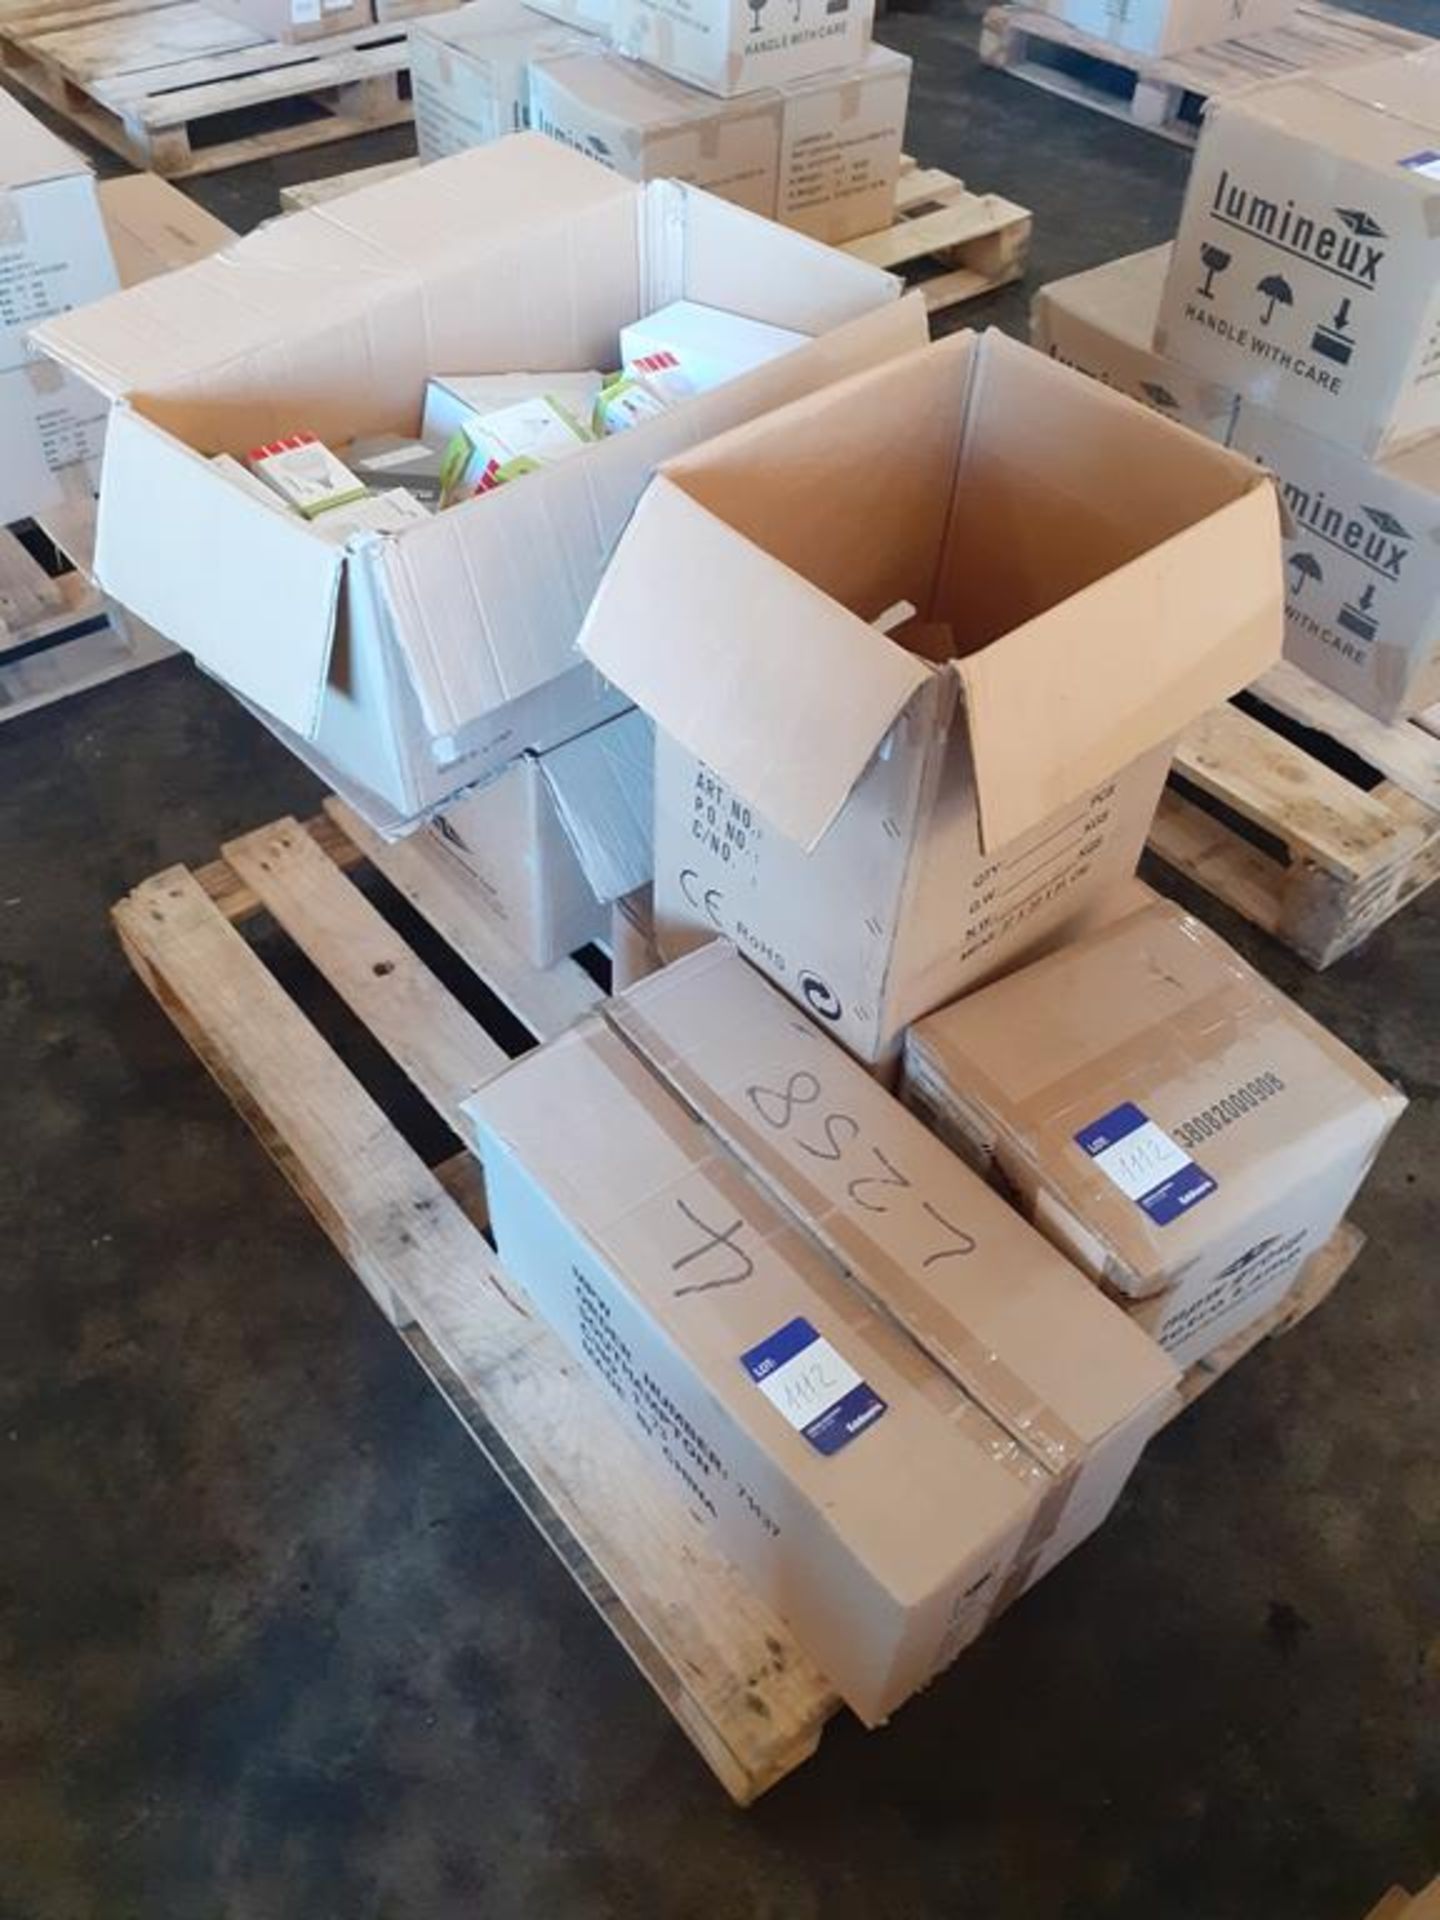 Pallet to contain various Lumineux Bulbs (70w, 35w, 9w)